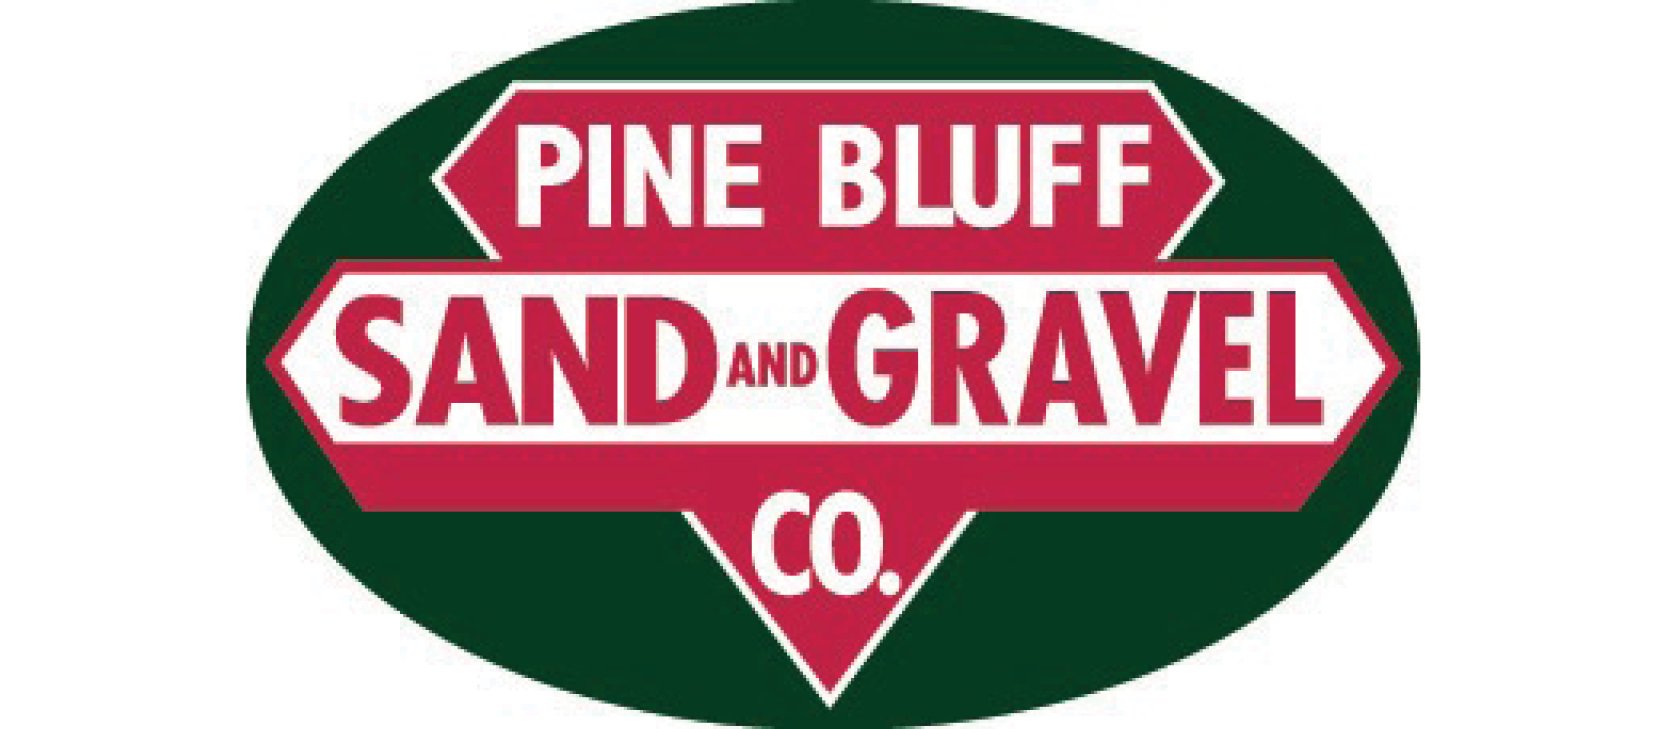 Pine Bluff Sand and Gravel Co.